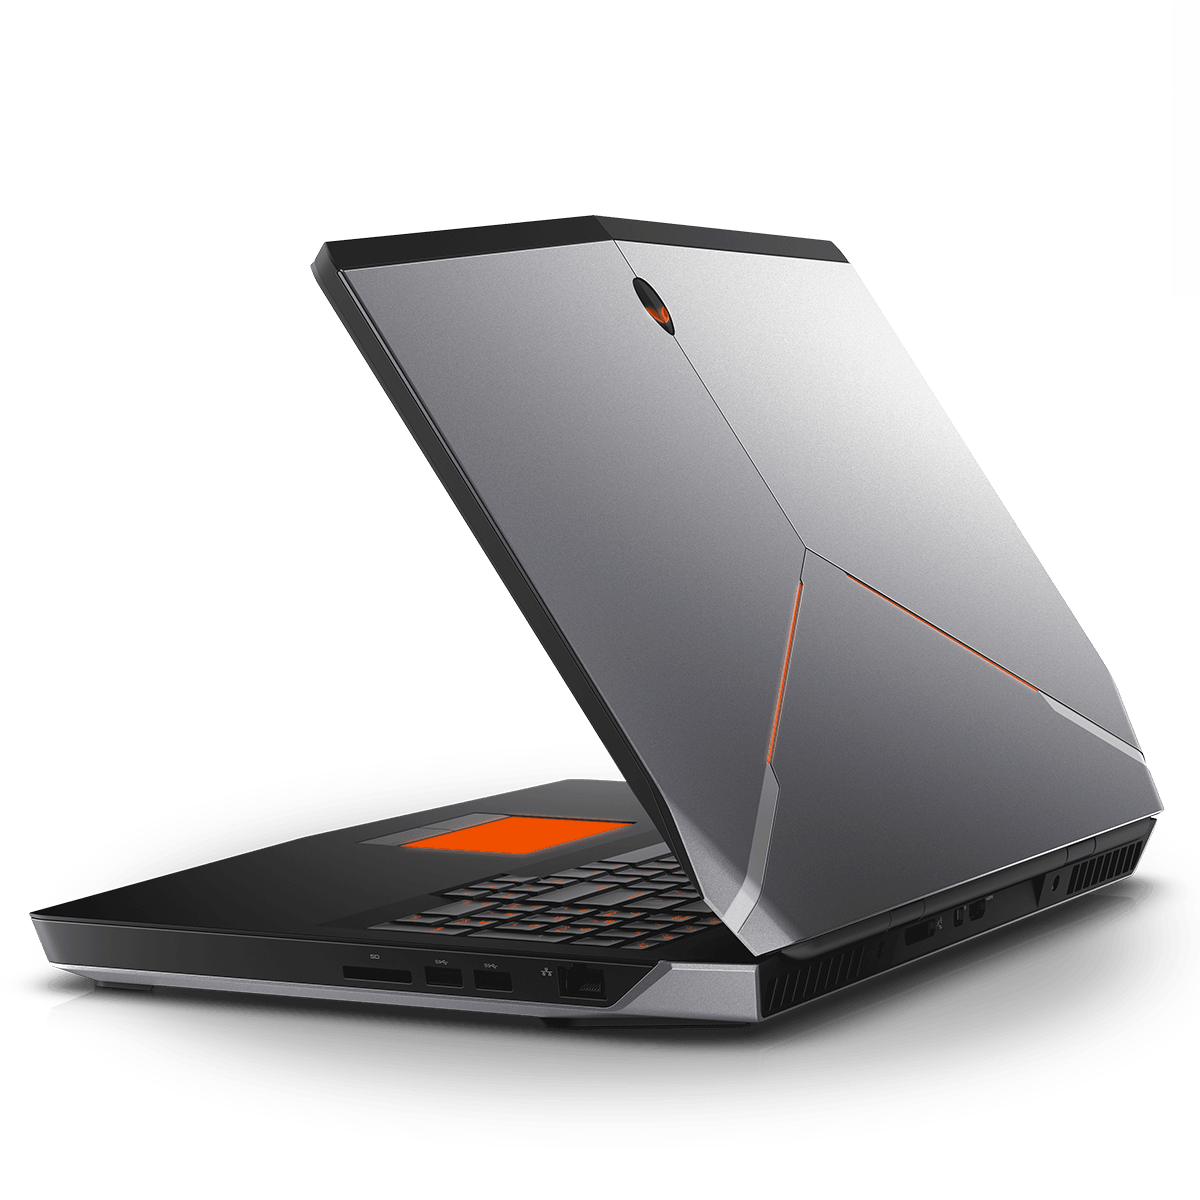 Gaming 17-inch laptop launch landing page